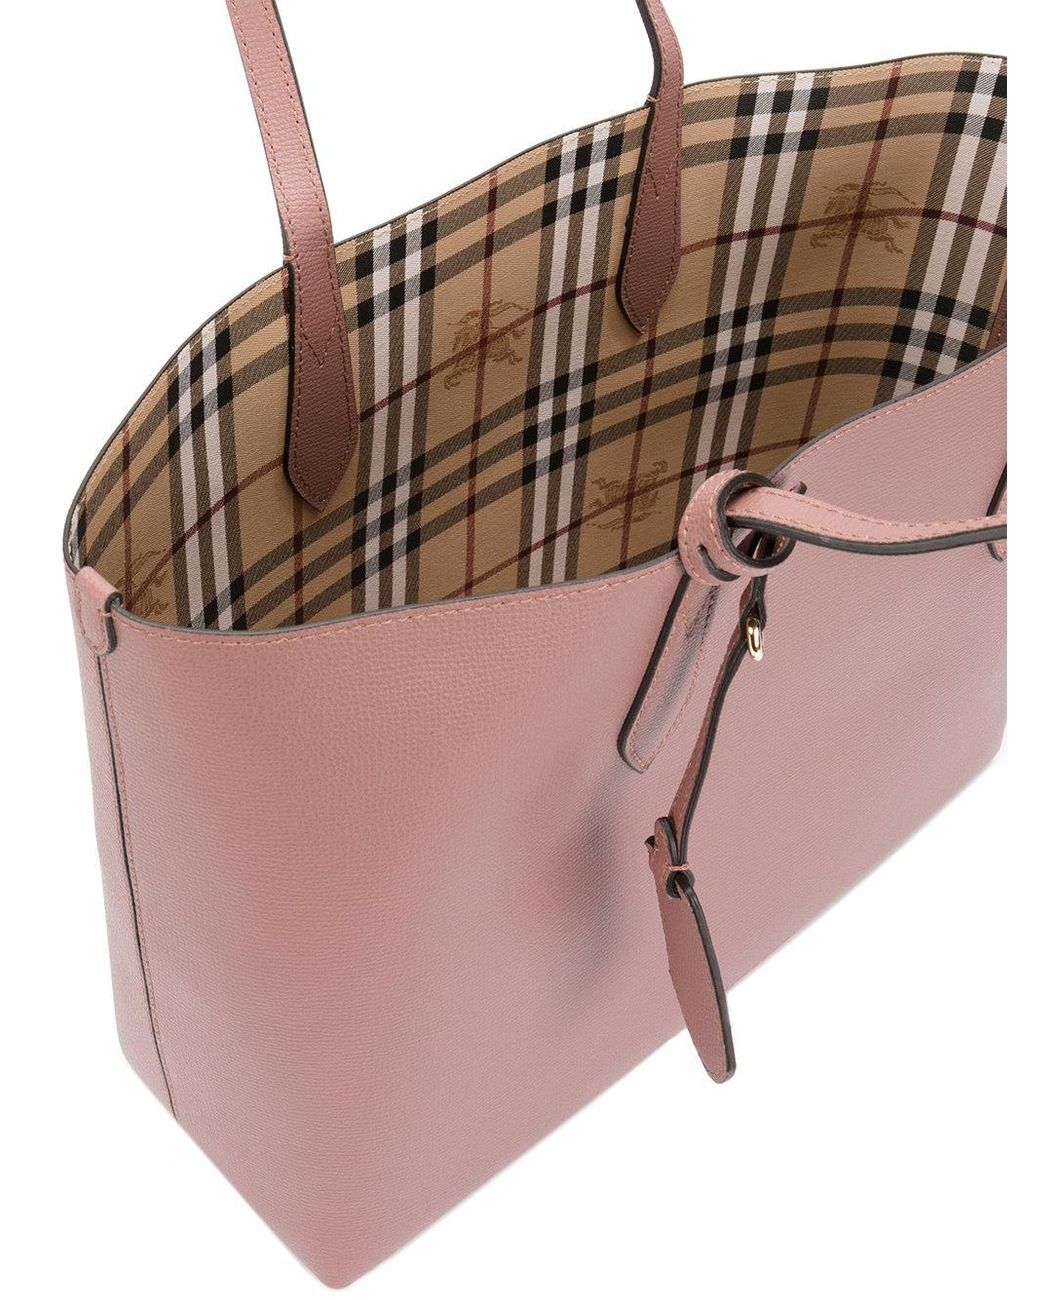 Burberry Leather Medium Reversible Tote in Pink & Purple (Pink) | Lyst